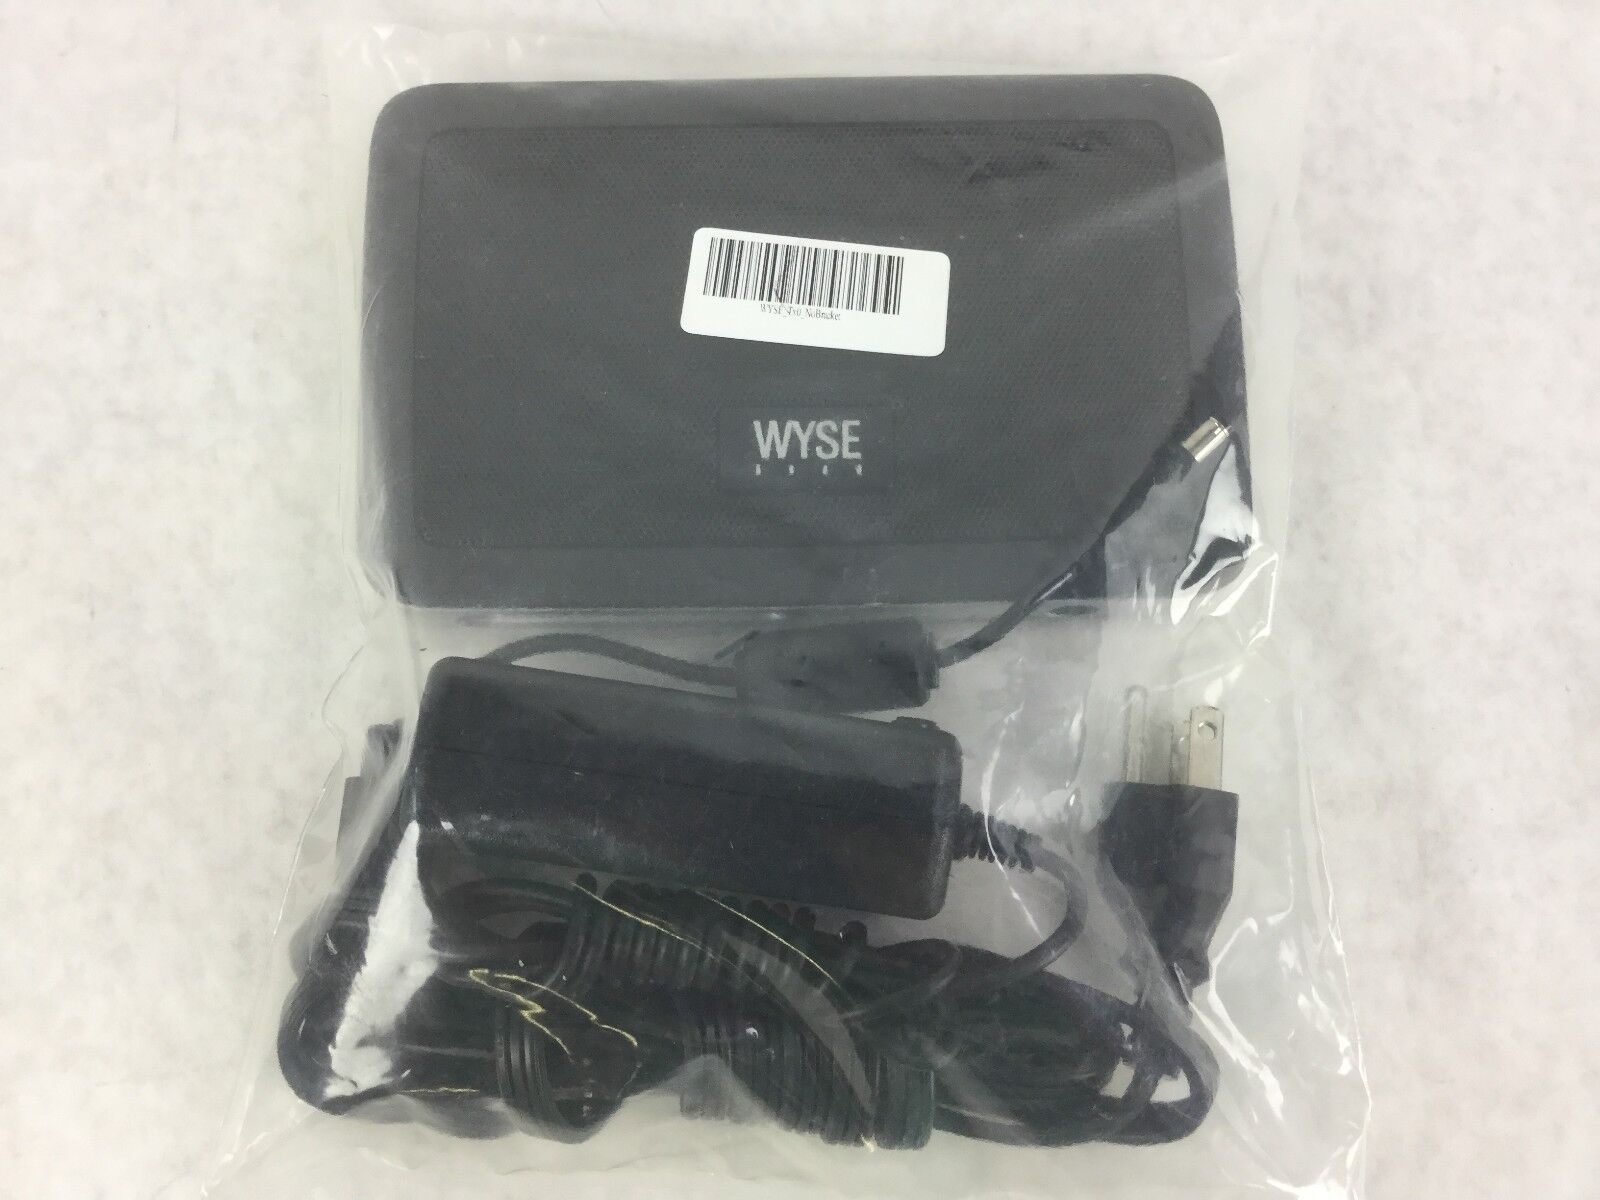 Dell Wyse Tx0, Thin Client, NEW in Sealed Package